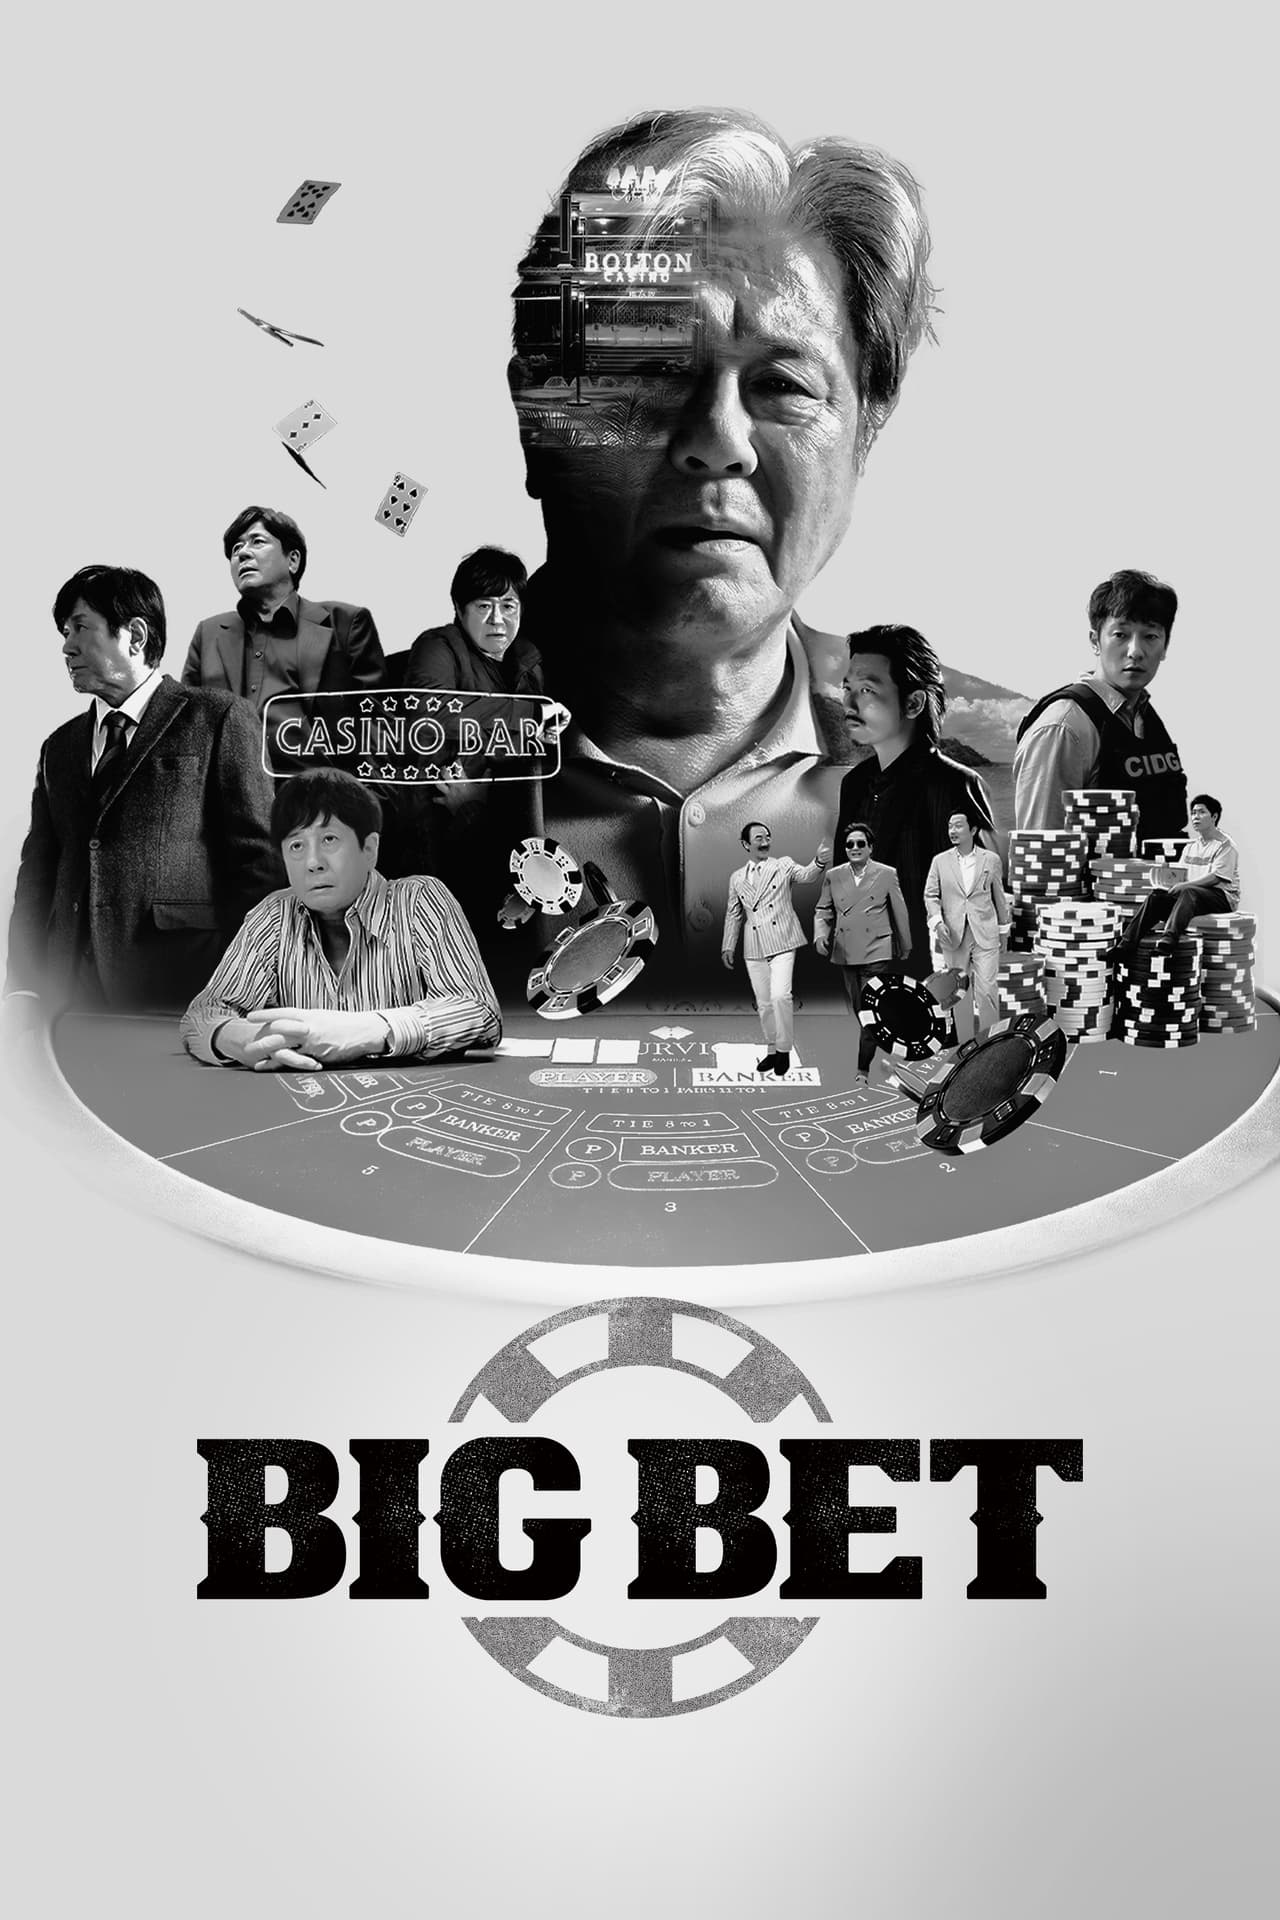 In the series, Big Bet - Cha Moosik runs a casino bar, only to flee to the Philippines due to a crackdown by the National Tax Service. He launches a full-fledged casino business, and strategizes winning over the political and business circles in the Philippines. However, he is suddenly framed as a suspect in Min Seokjun’s death, and is tracked by Oh Seunghoon of the Korean Desk. Betrayal is rampant in the presence of money.